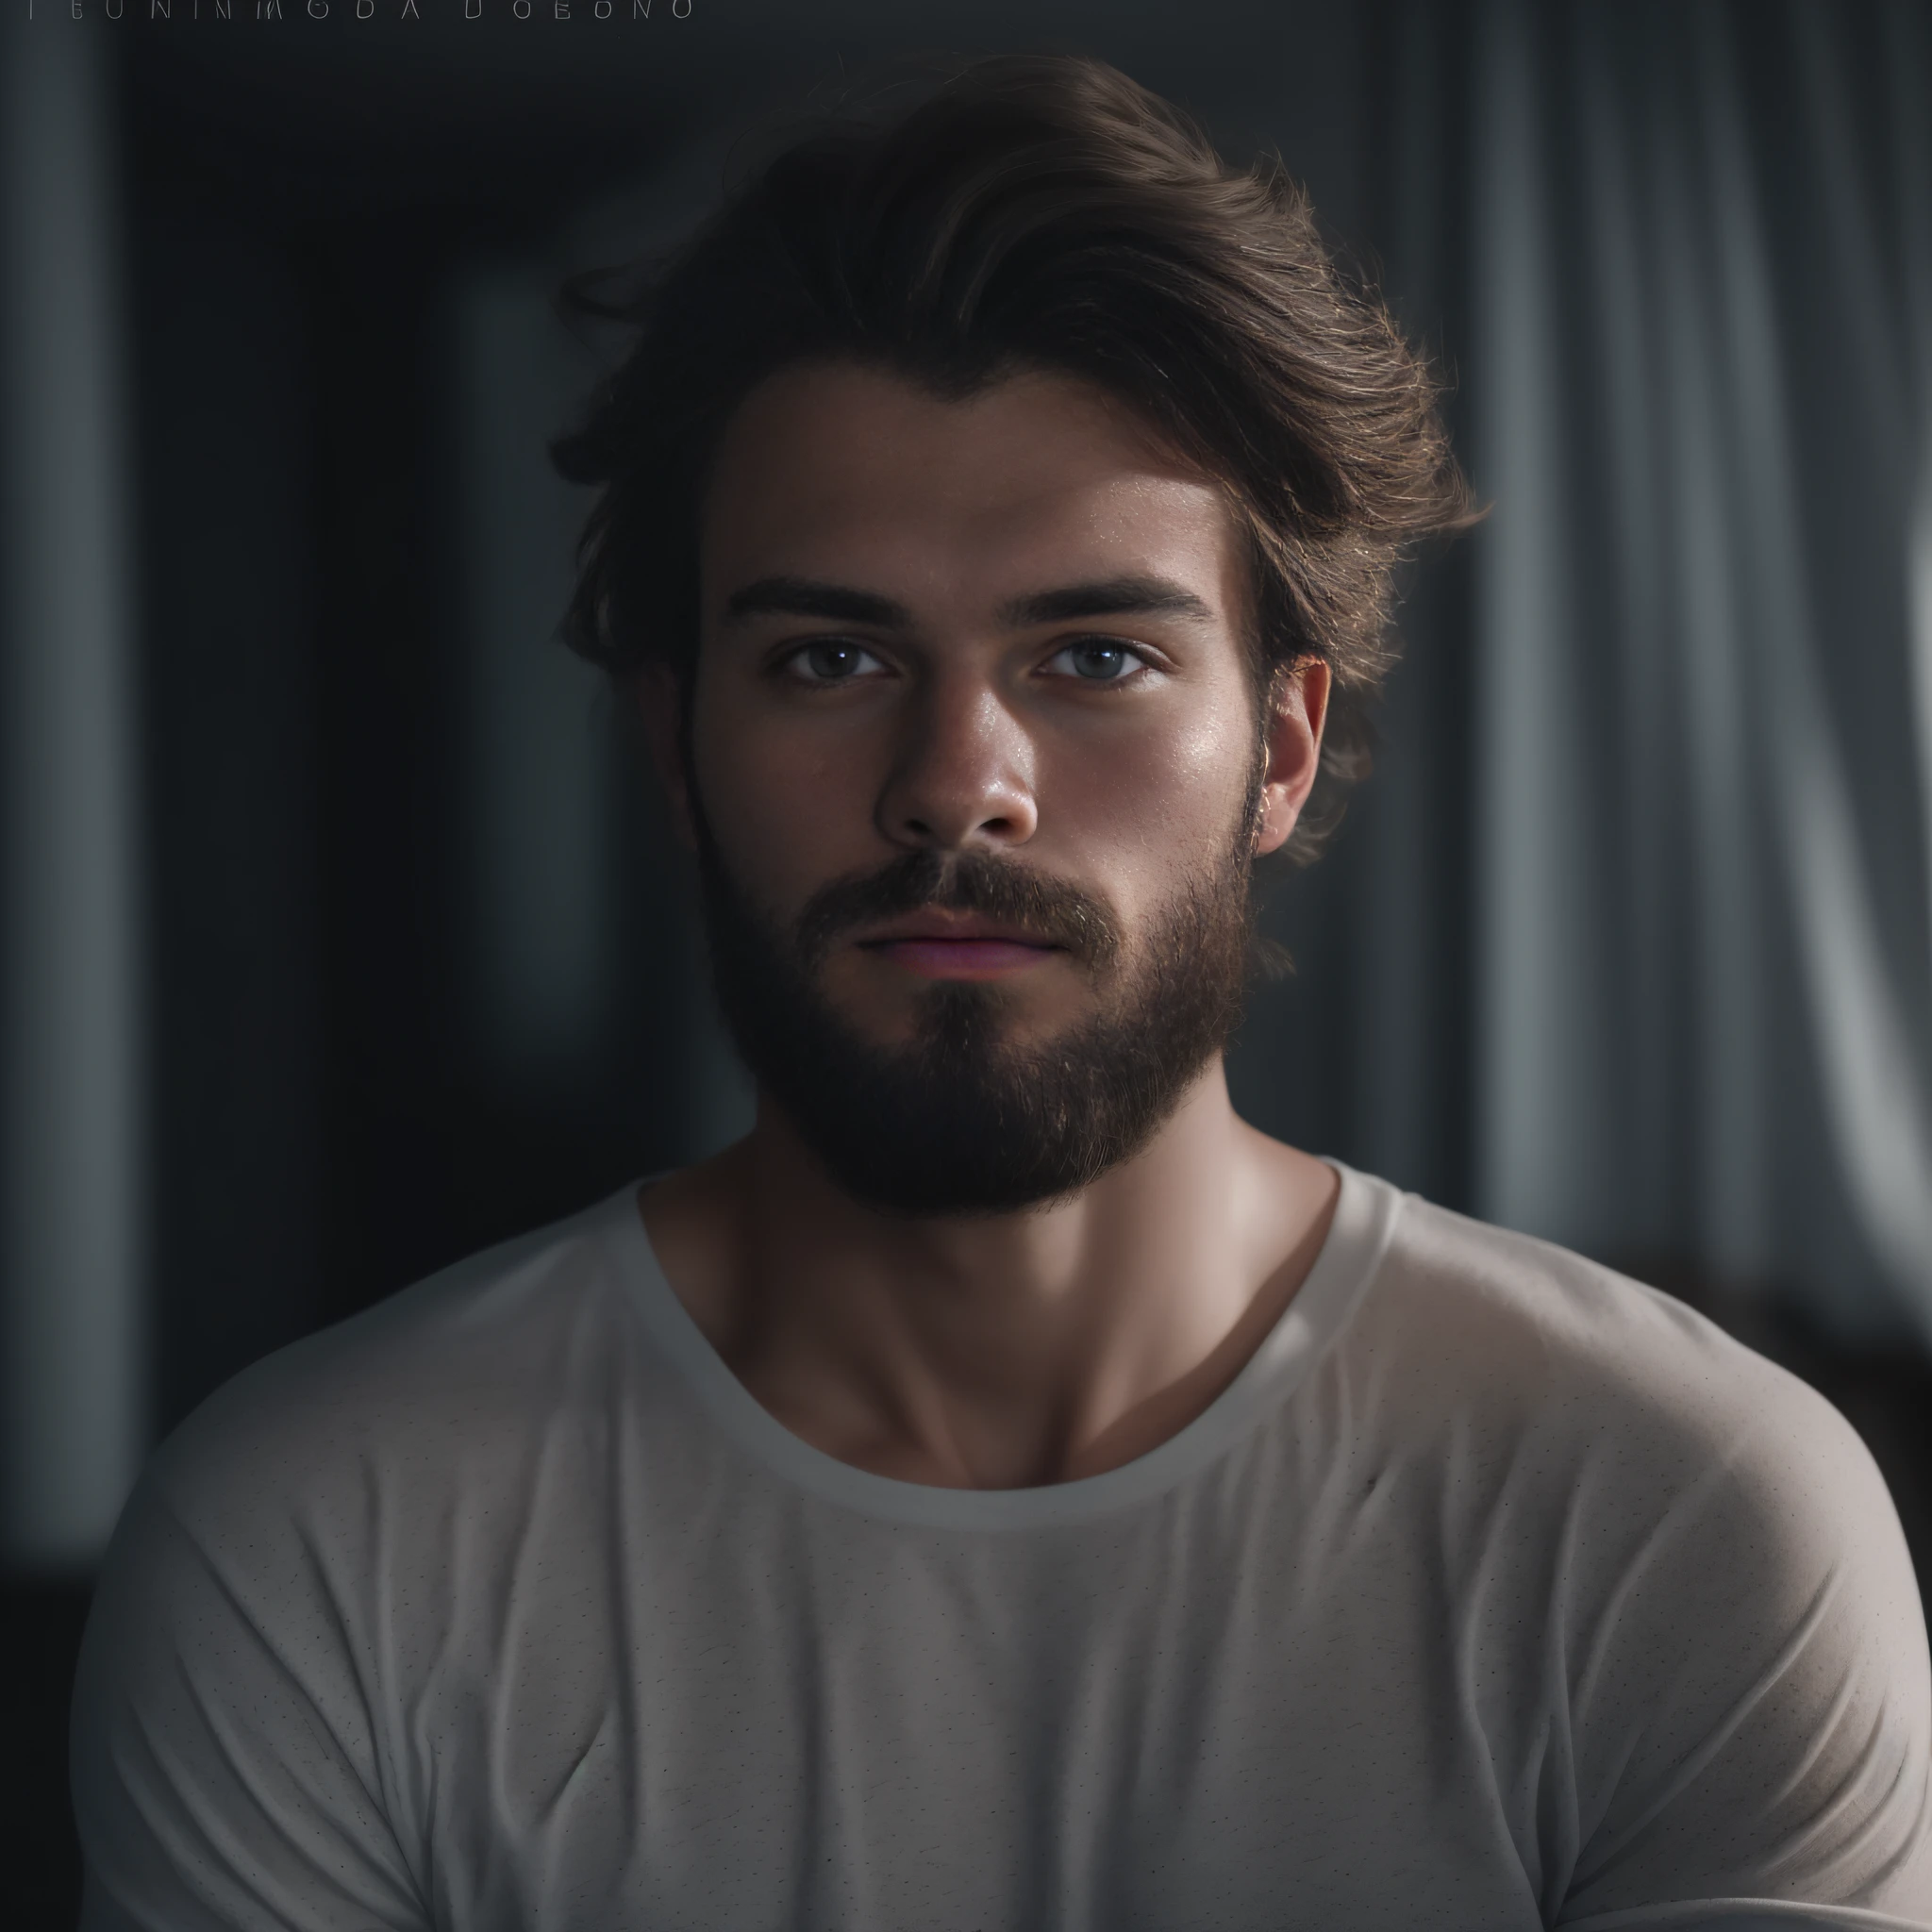 A 23-year-old man from Finland, masculine, bearded, full beard, role model, fully body, Very beauthful, looking-into-camera, detailled image, uhd, 8K, well-lit, grain of film, perfect  lighting